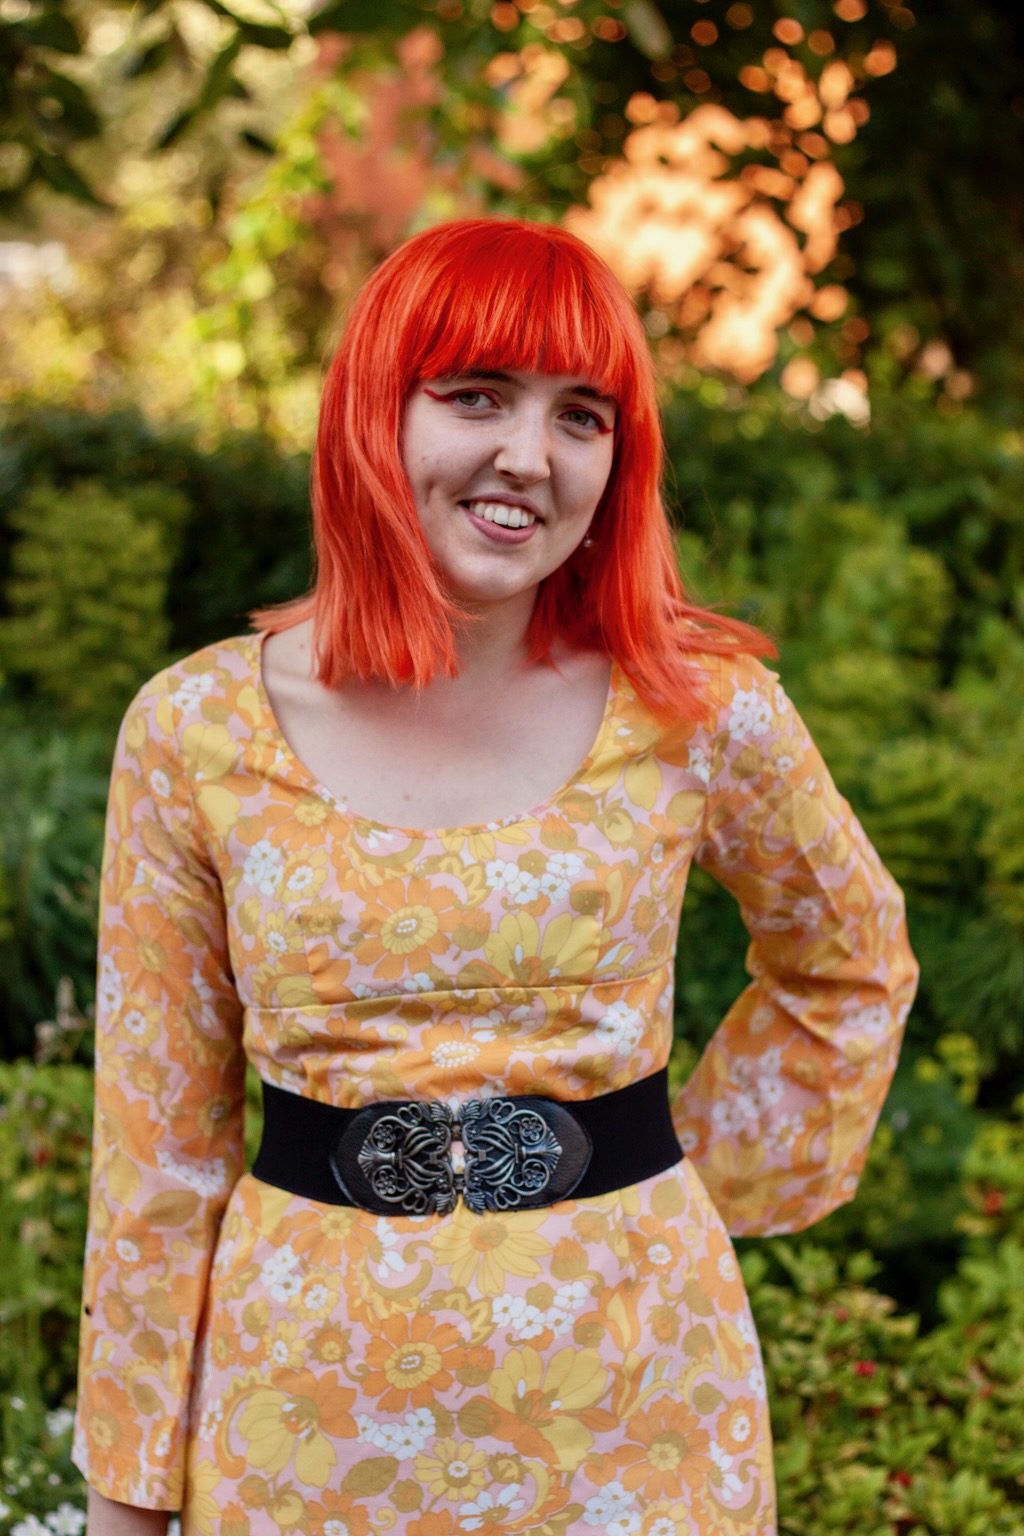 Person with orange hair and yellow dress